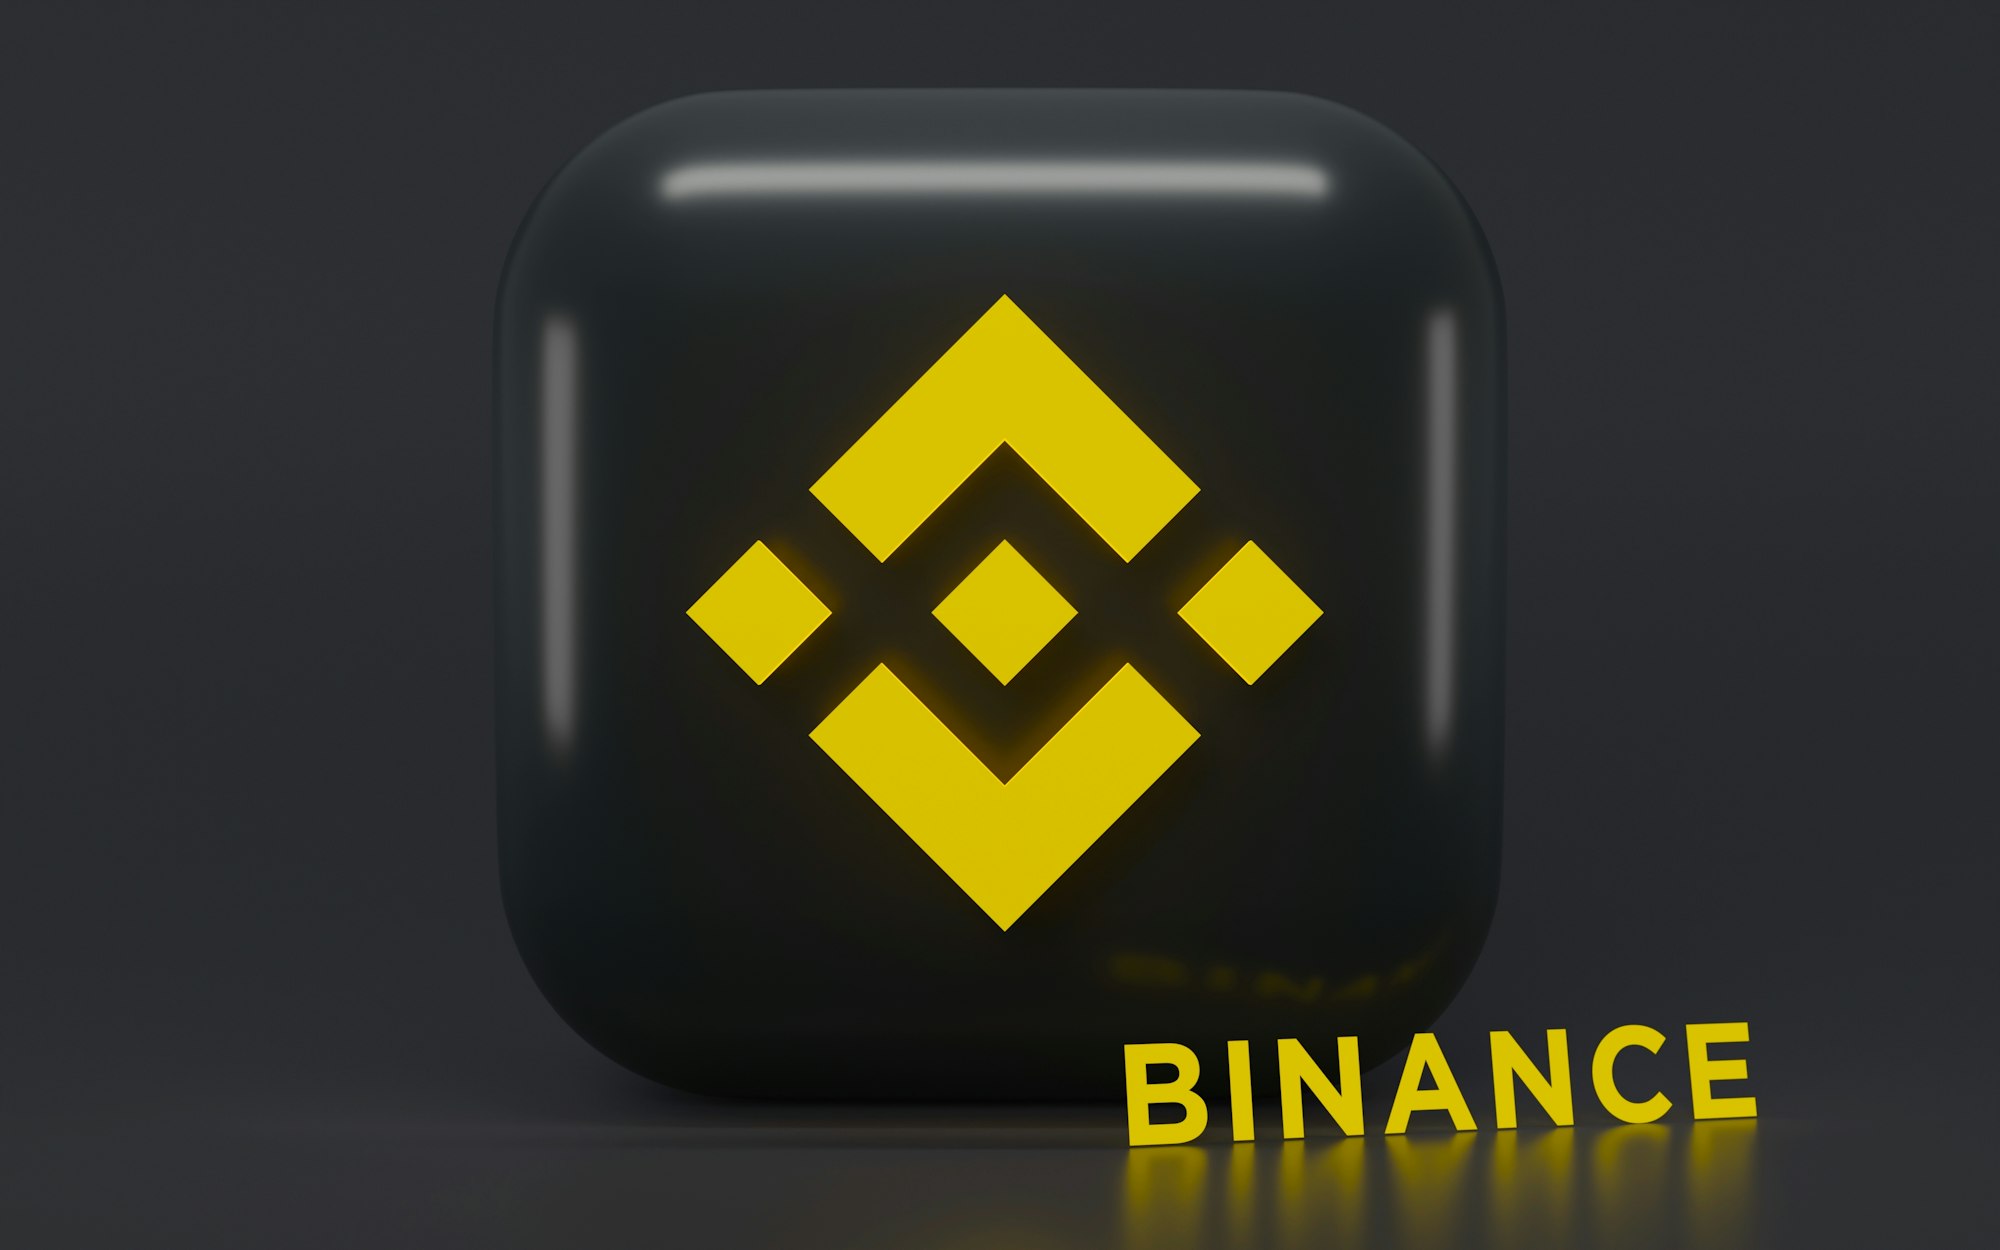 Binance is dominating the crypto space with more than half of the market share